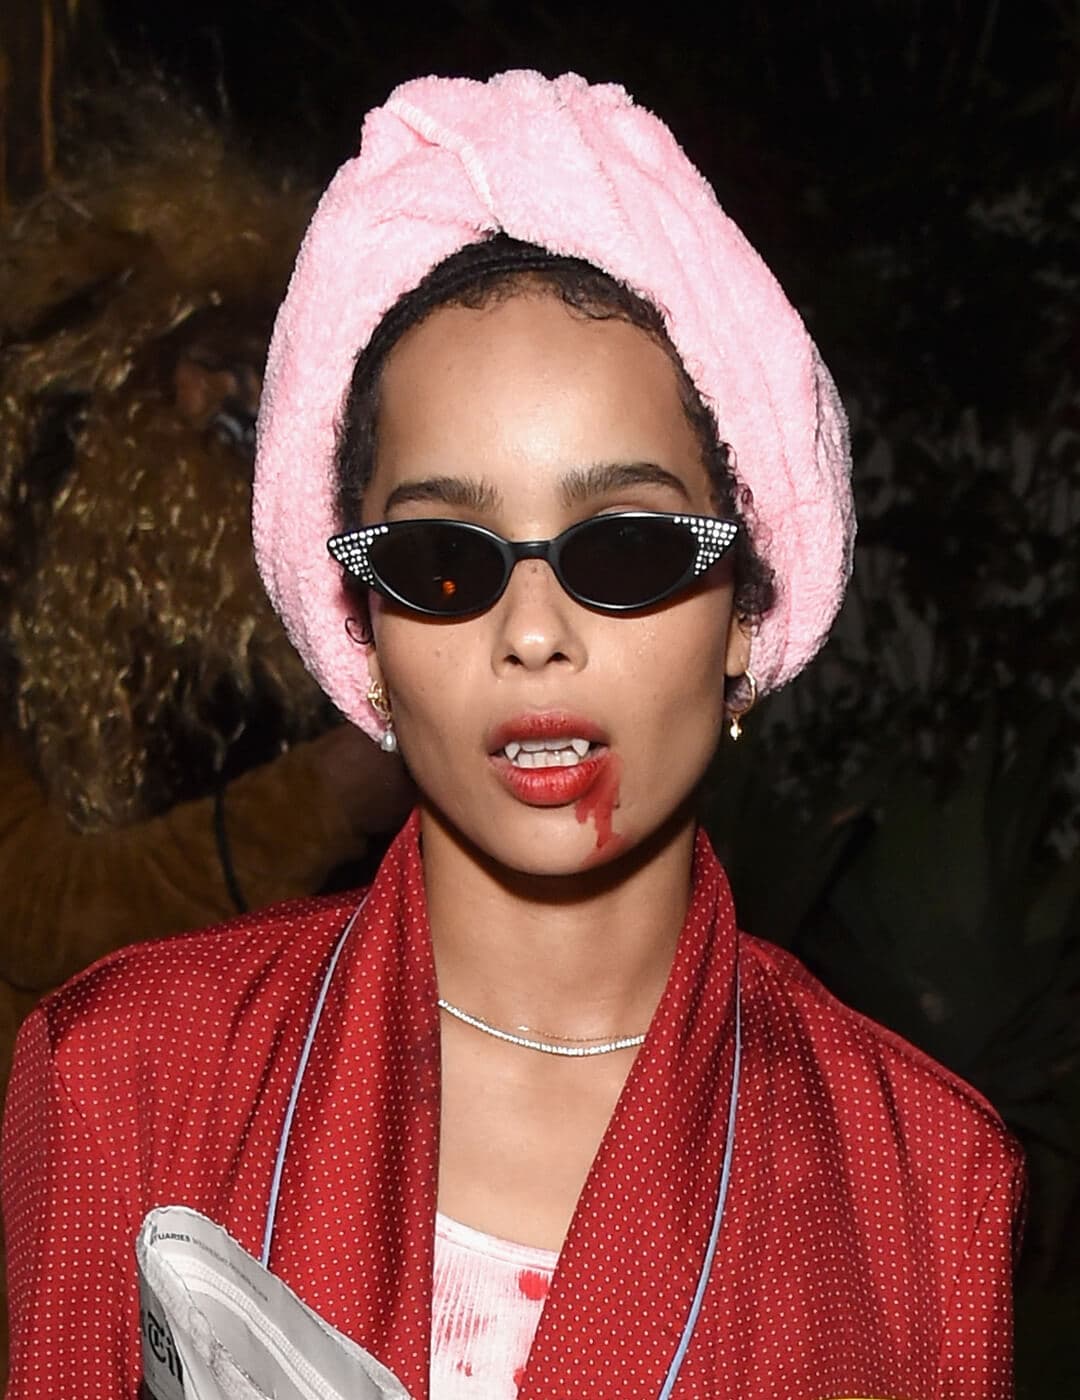 Zoe Kravitz dressed up as a vampire in a red bathrobe, pink headwrap, and cool sunglasses